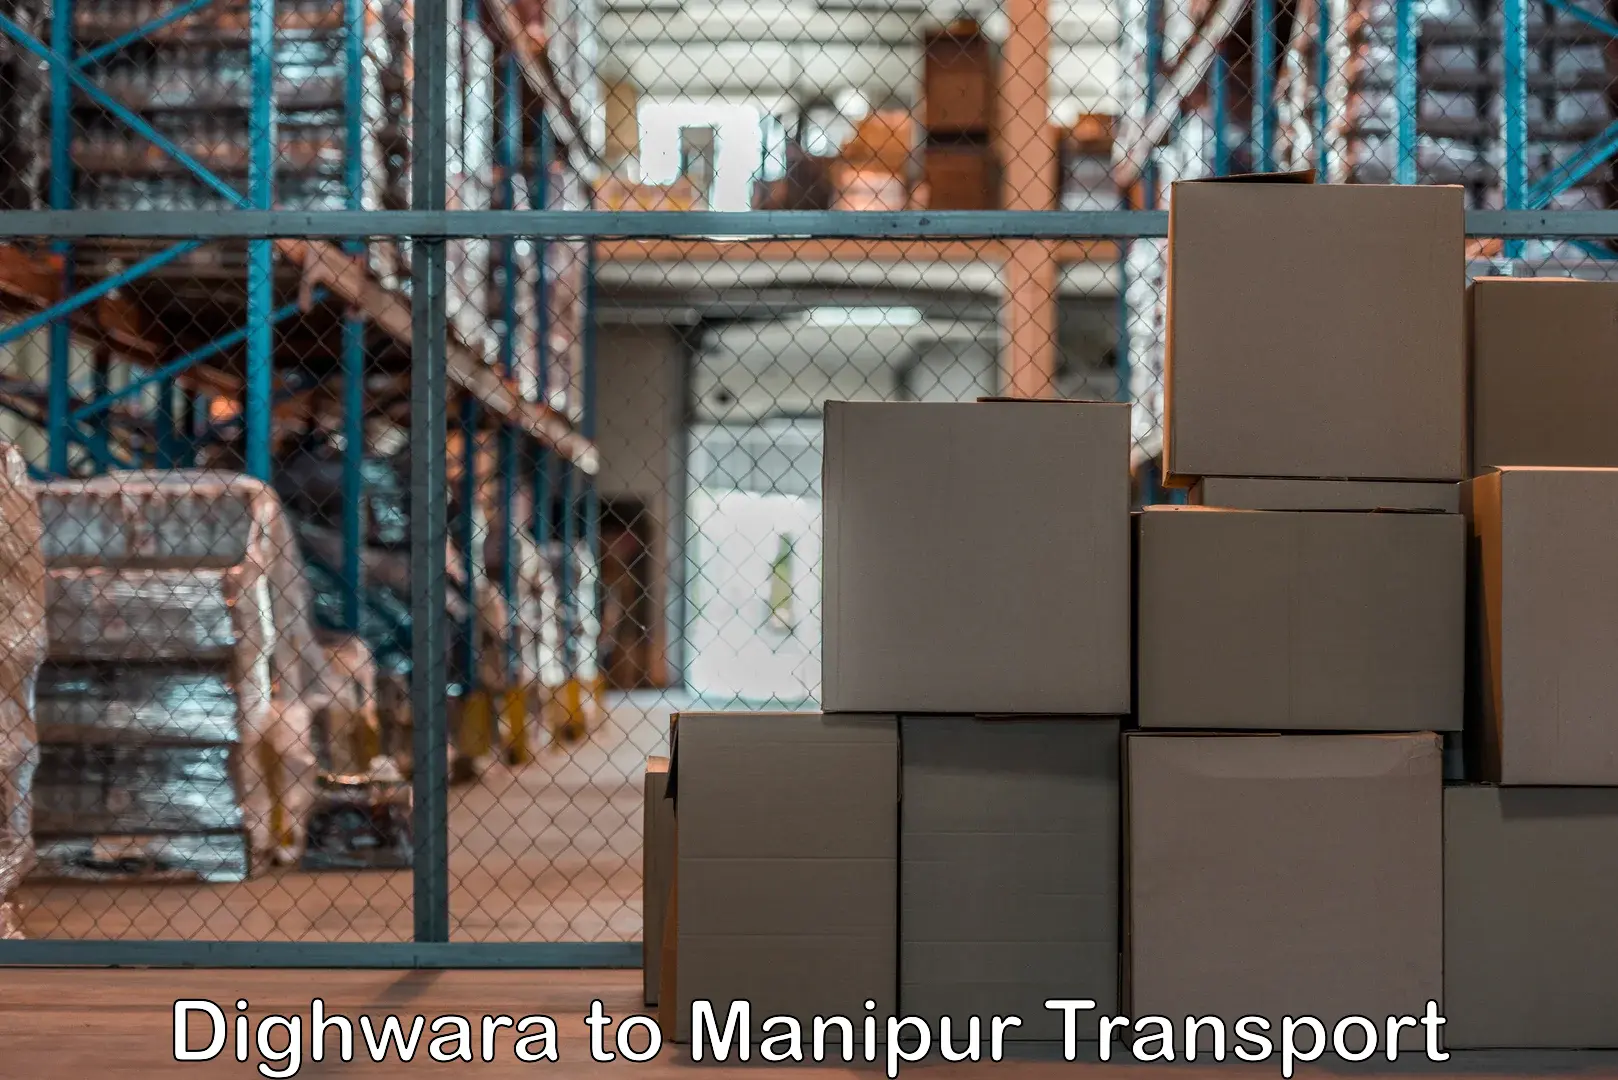 Daily parcel service transport Dighwara to Manipur